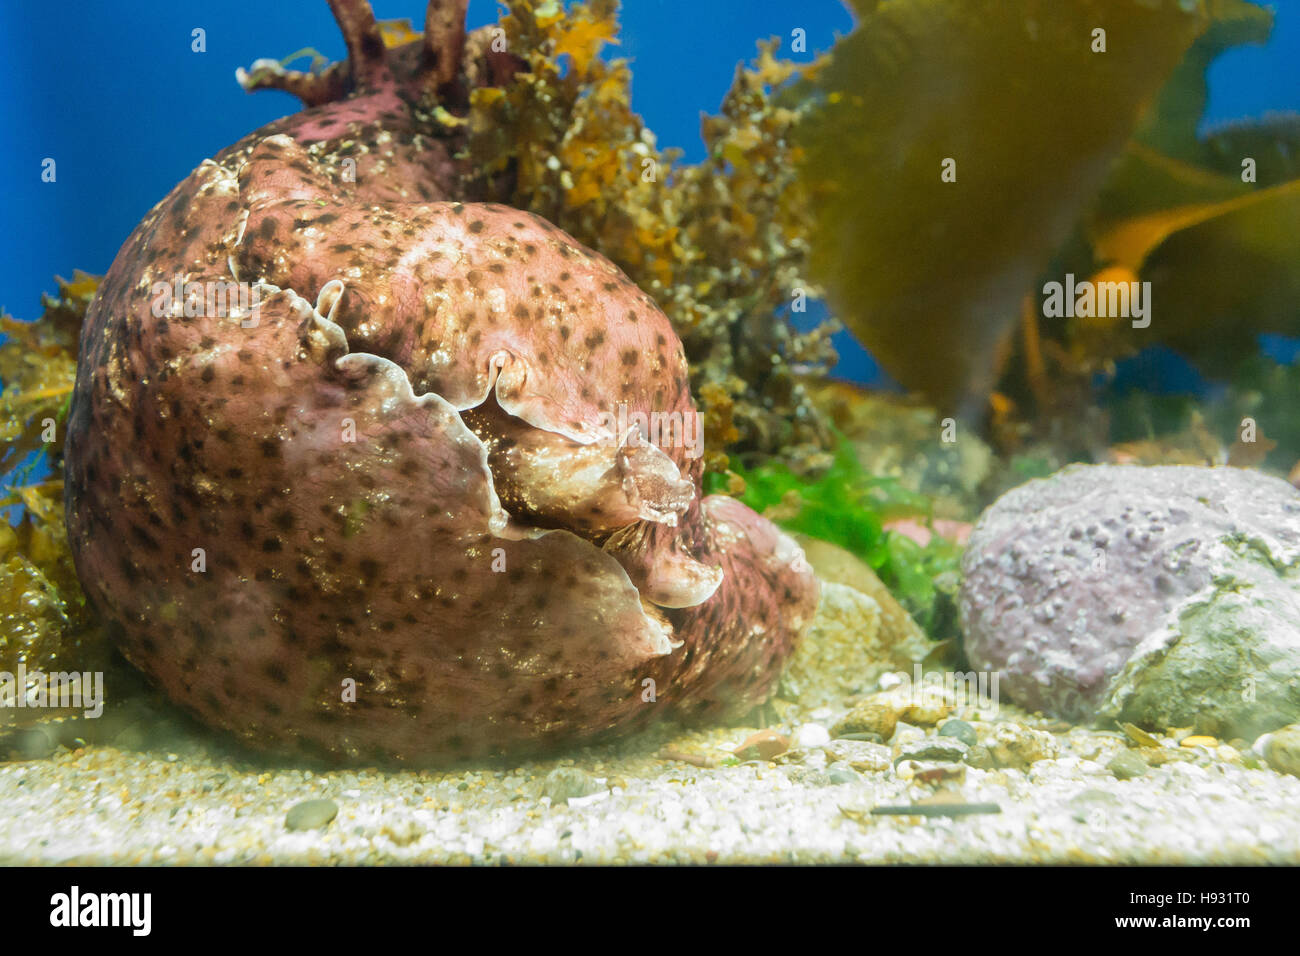 Spotted pink mollusk on gravel at bottom of aquarium display case. Stock Photo